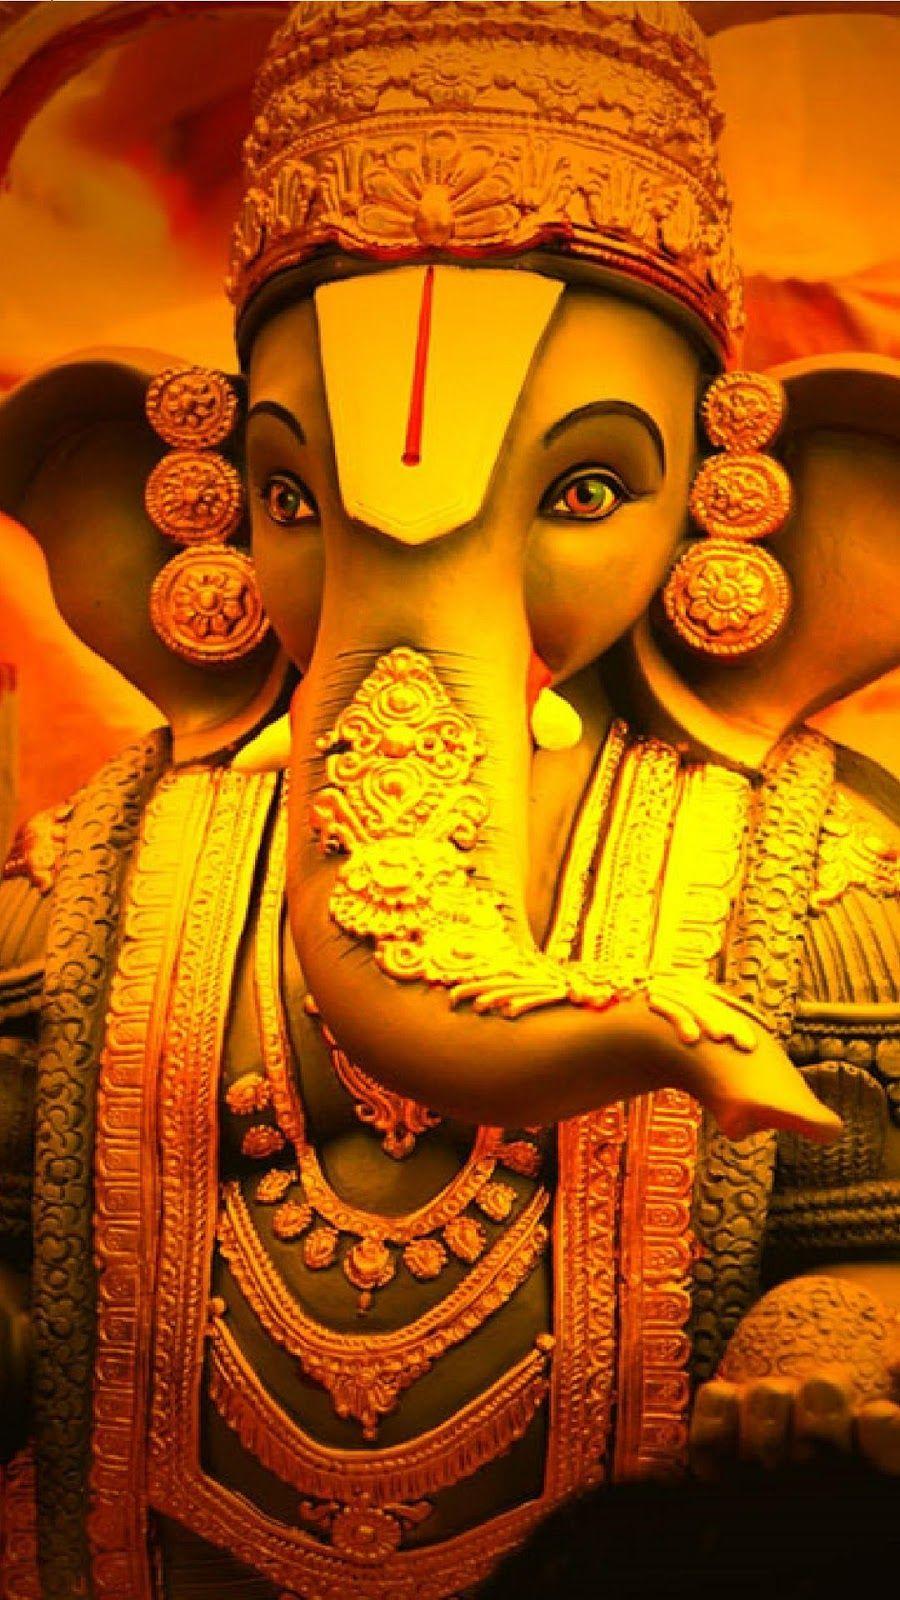 Download Ganesha wallpapers for mobile phone free Ganesha HD pictures